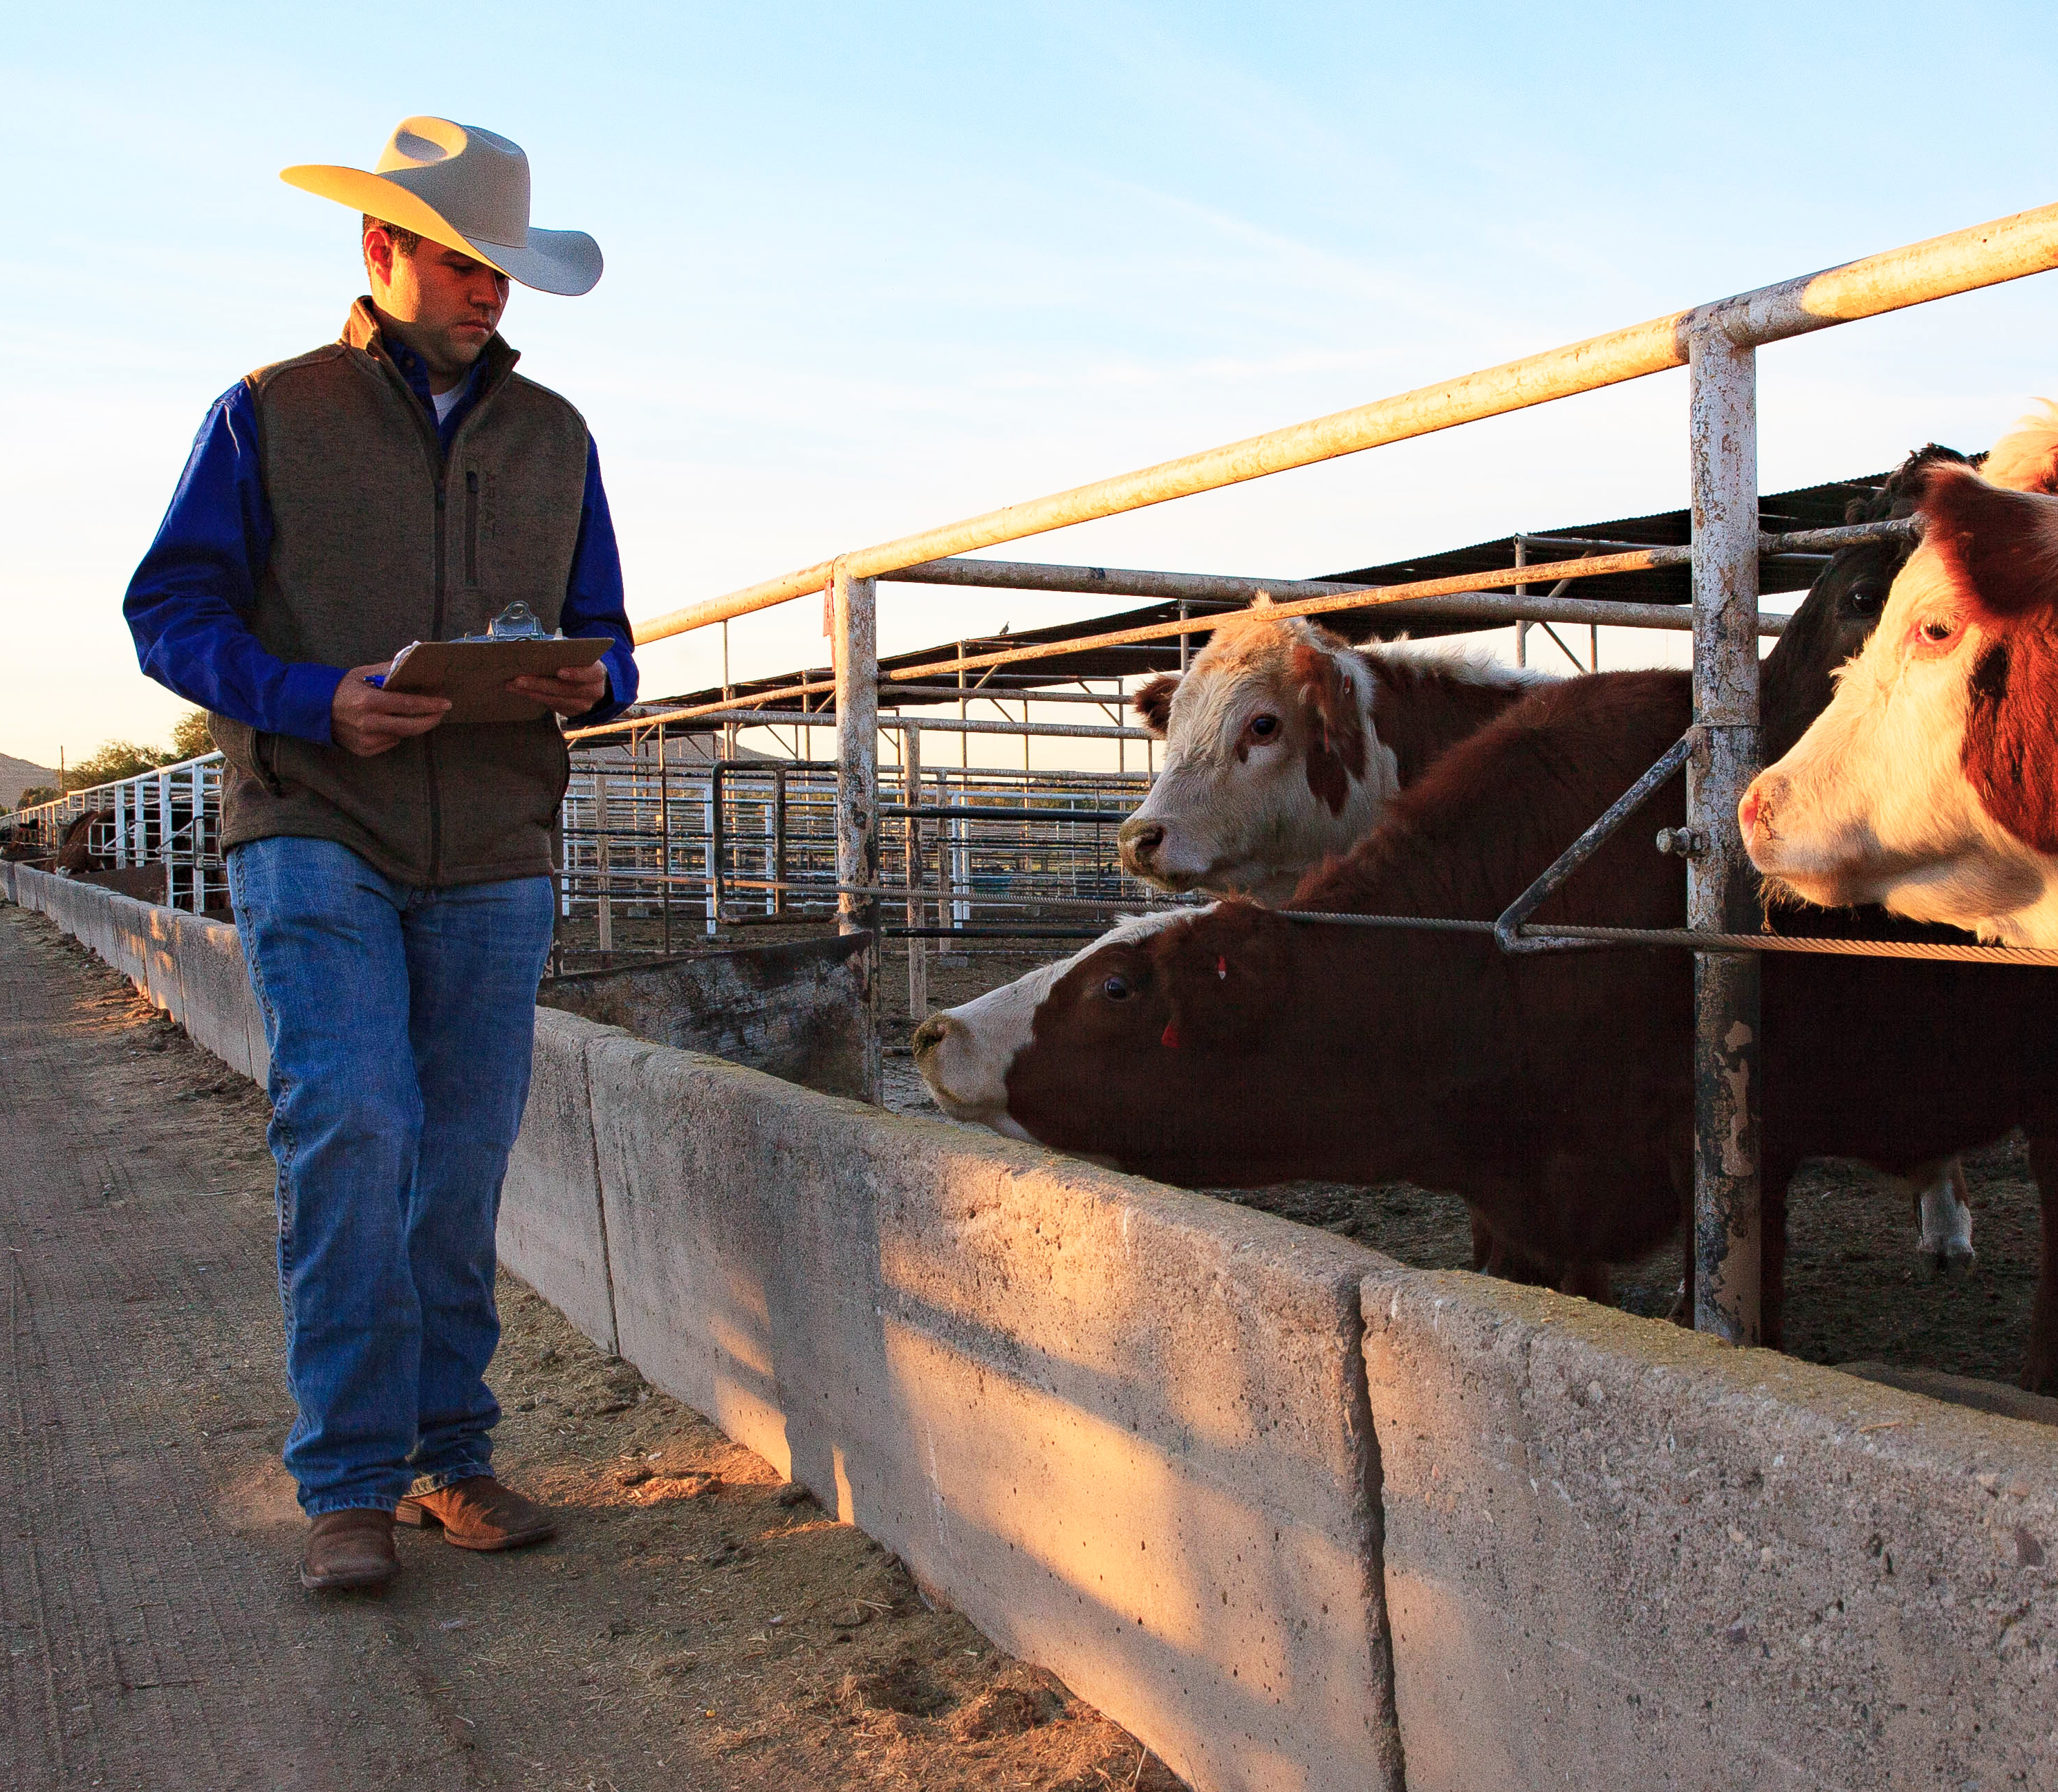 Student examining feed bunks in cattle feed yard